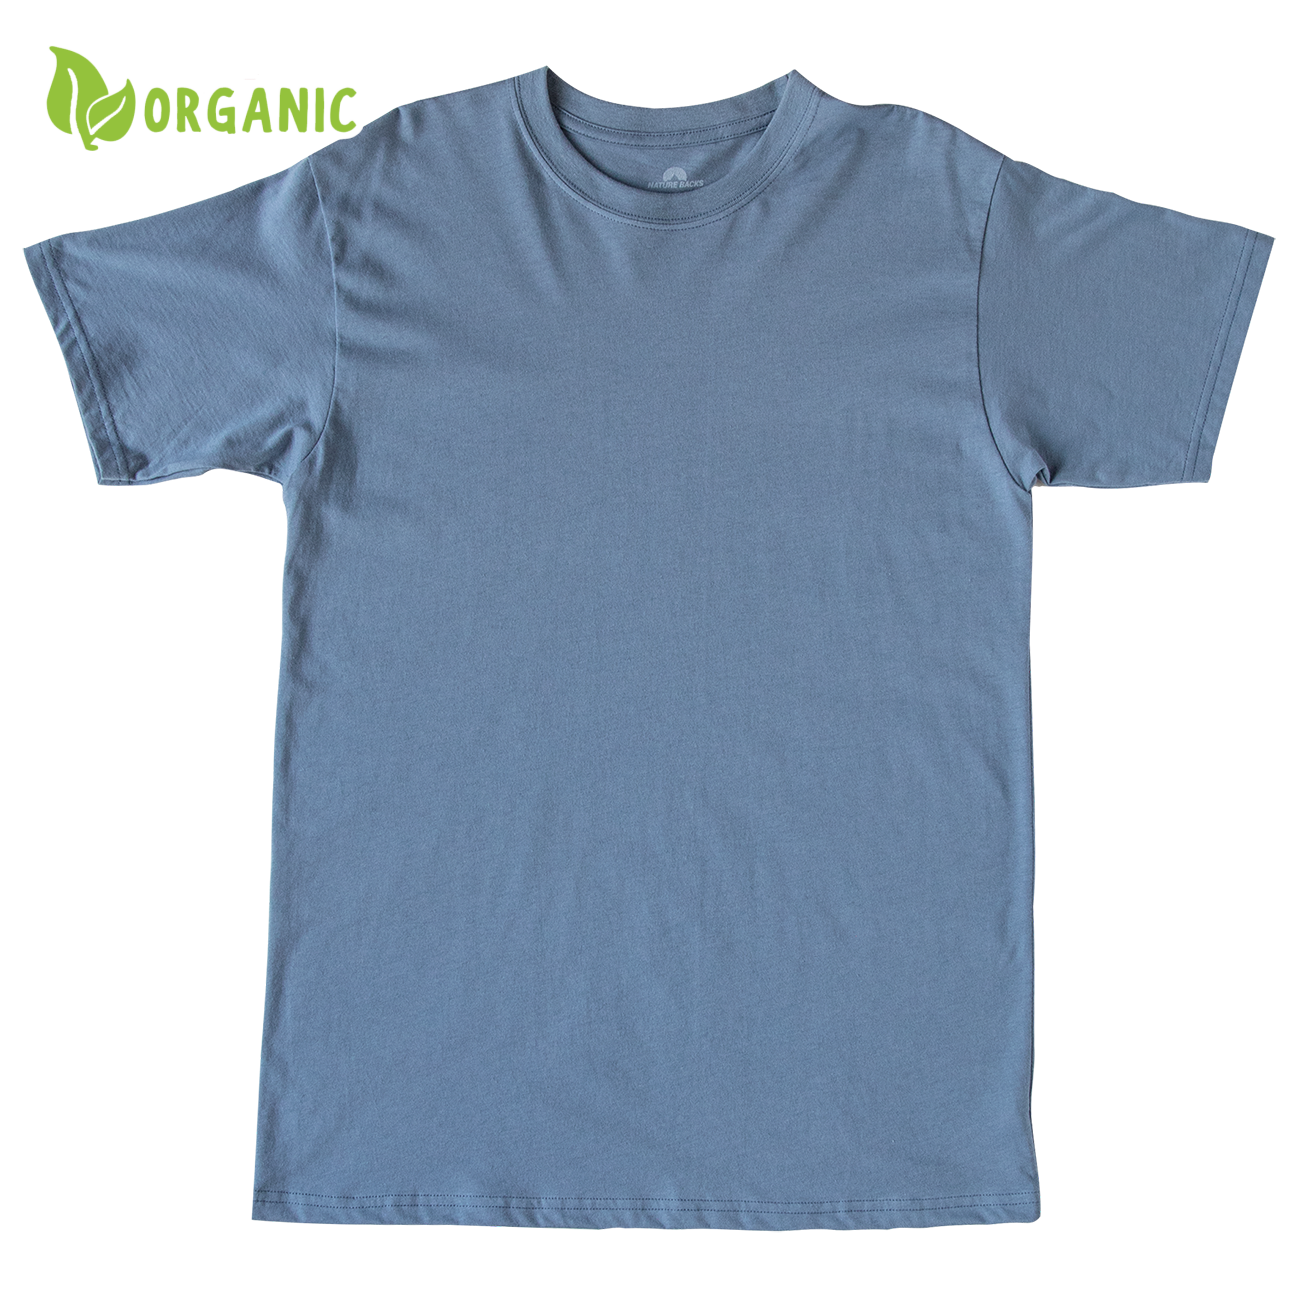 Nature Backs Short Sleeve 100% Organic Cotton T-Shirt | Minimalist Fog Short Sleeve made with Eco-Friendly Fibers Sustainably made in the USA 